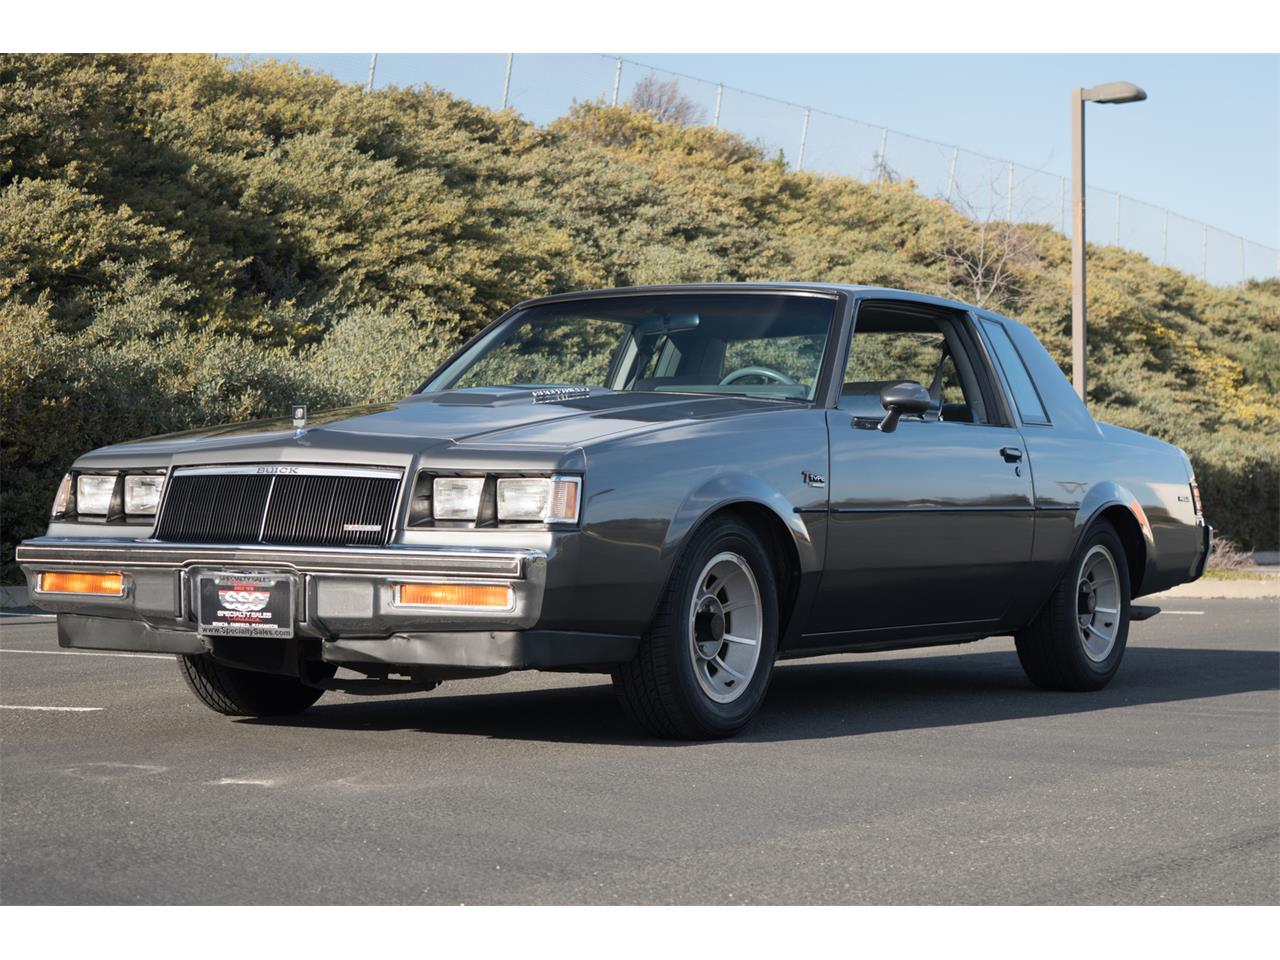 1986 buick regal for sale in fairfield ca classiccarsbay com 1986 buick regal for sale in fairfield